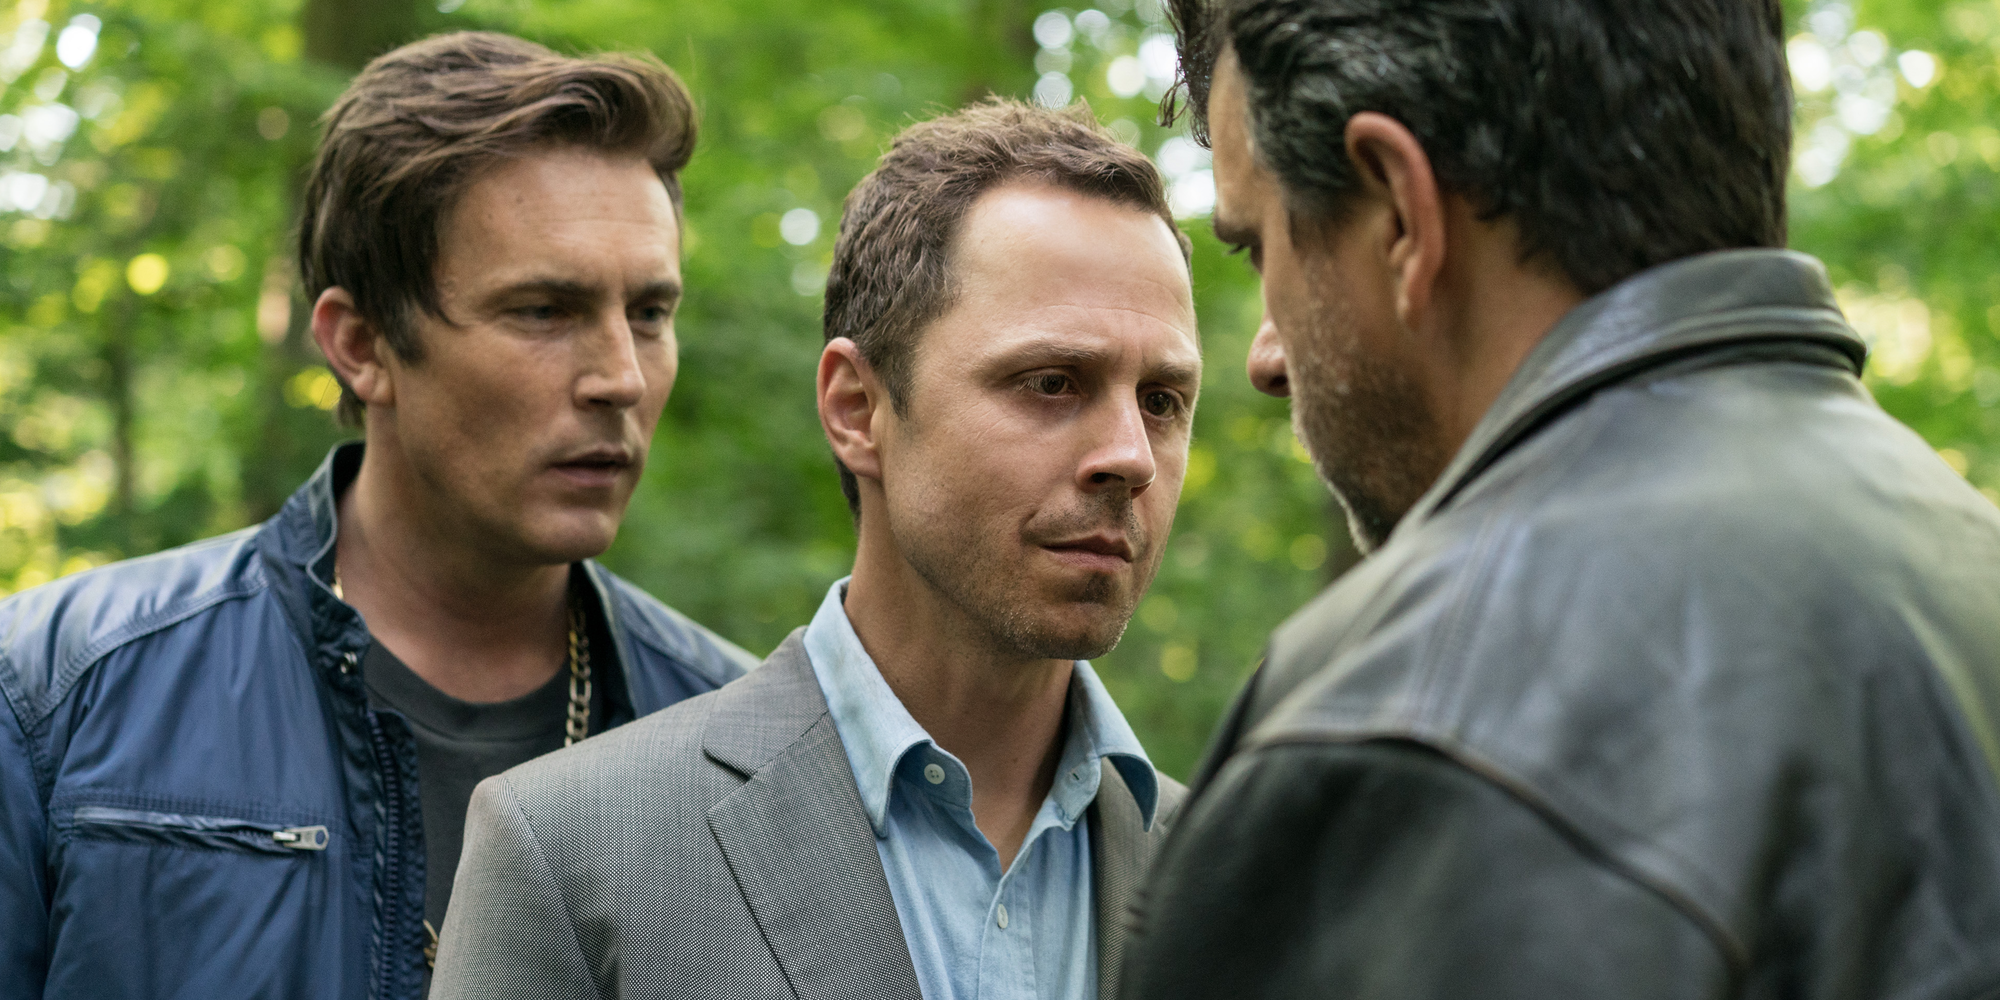 Sneaky Pete Review: A Fun Season 2 Makes Great Use Of An Excellent Cast